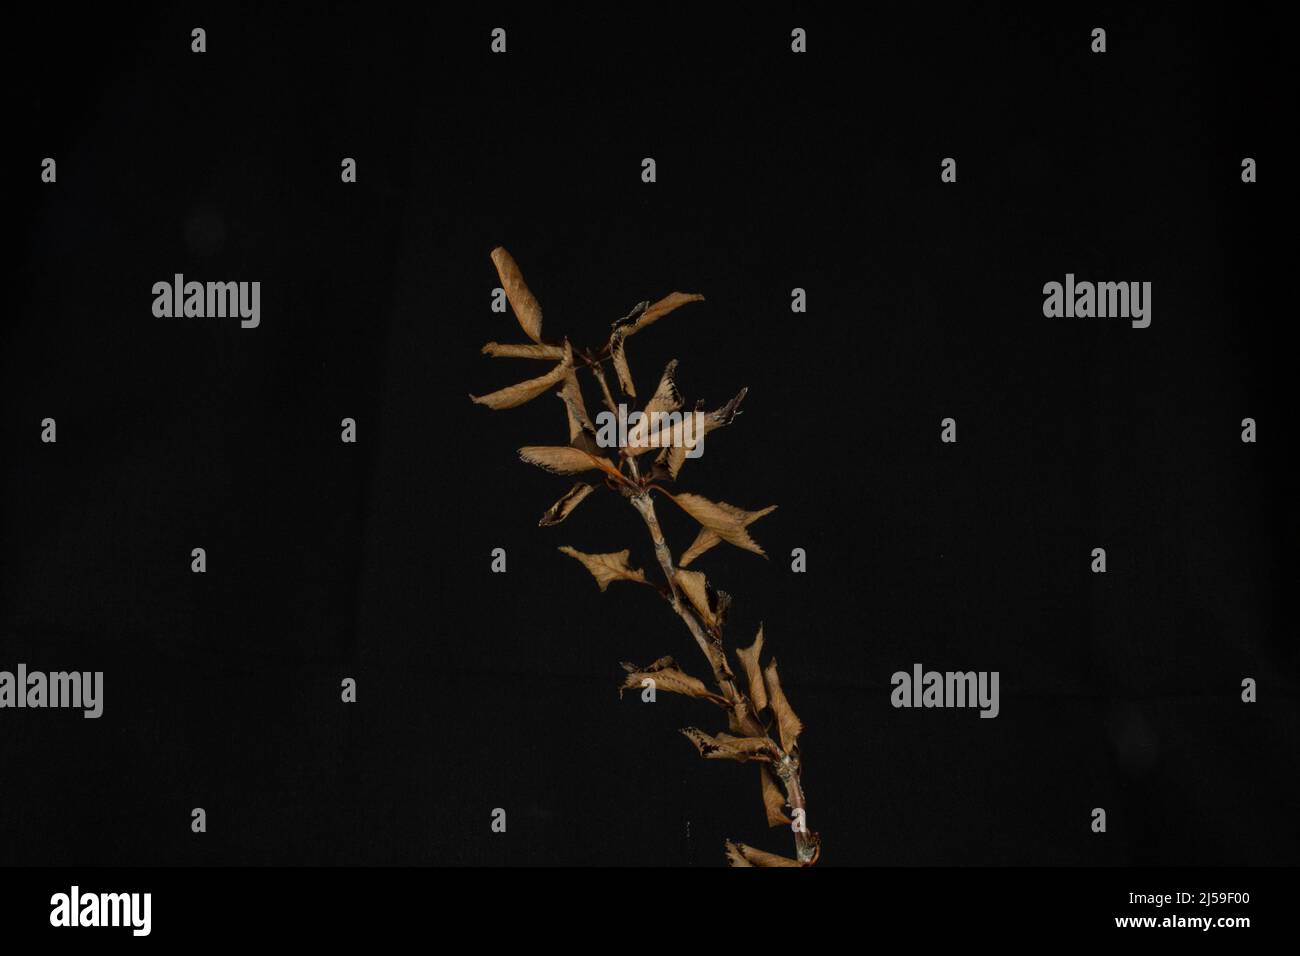 a single branch of brown dead leaves isolated with white light on a black background Stock Photo